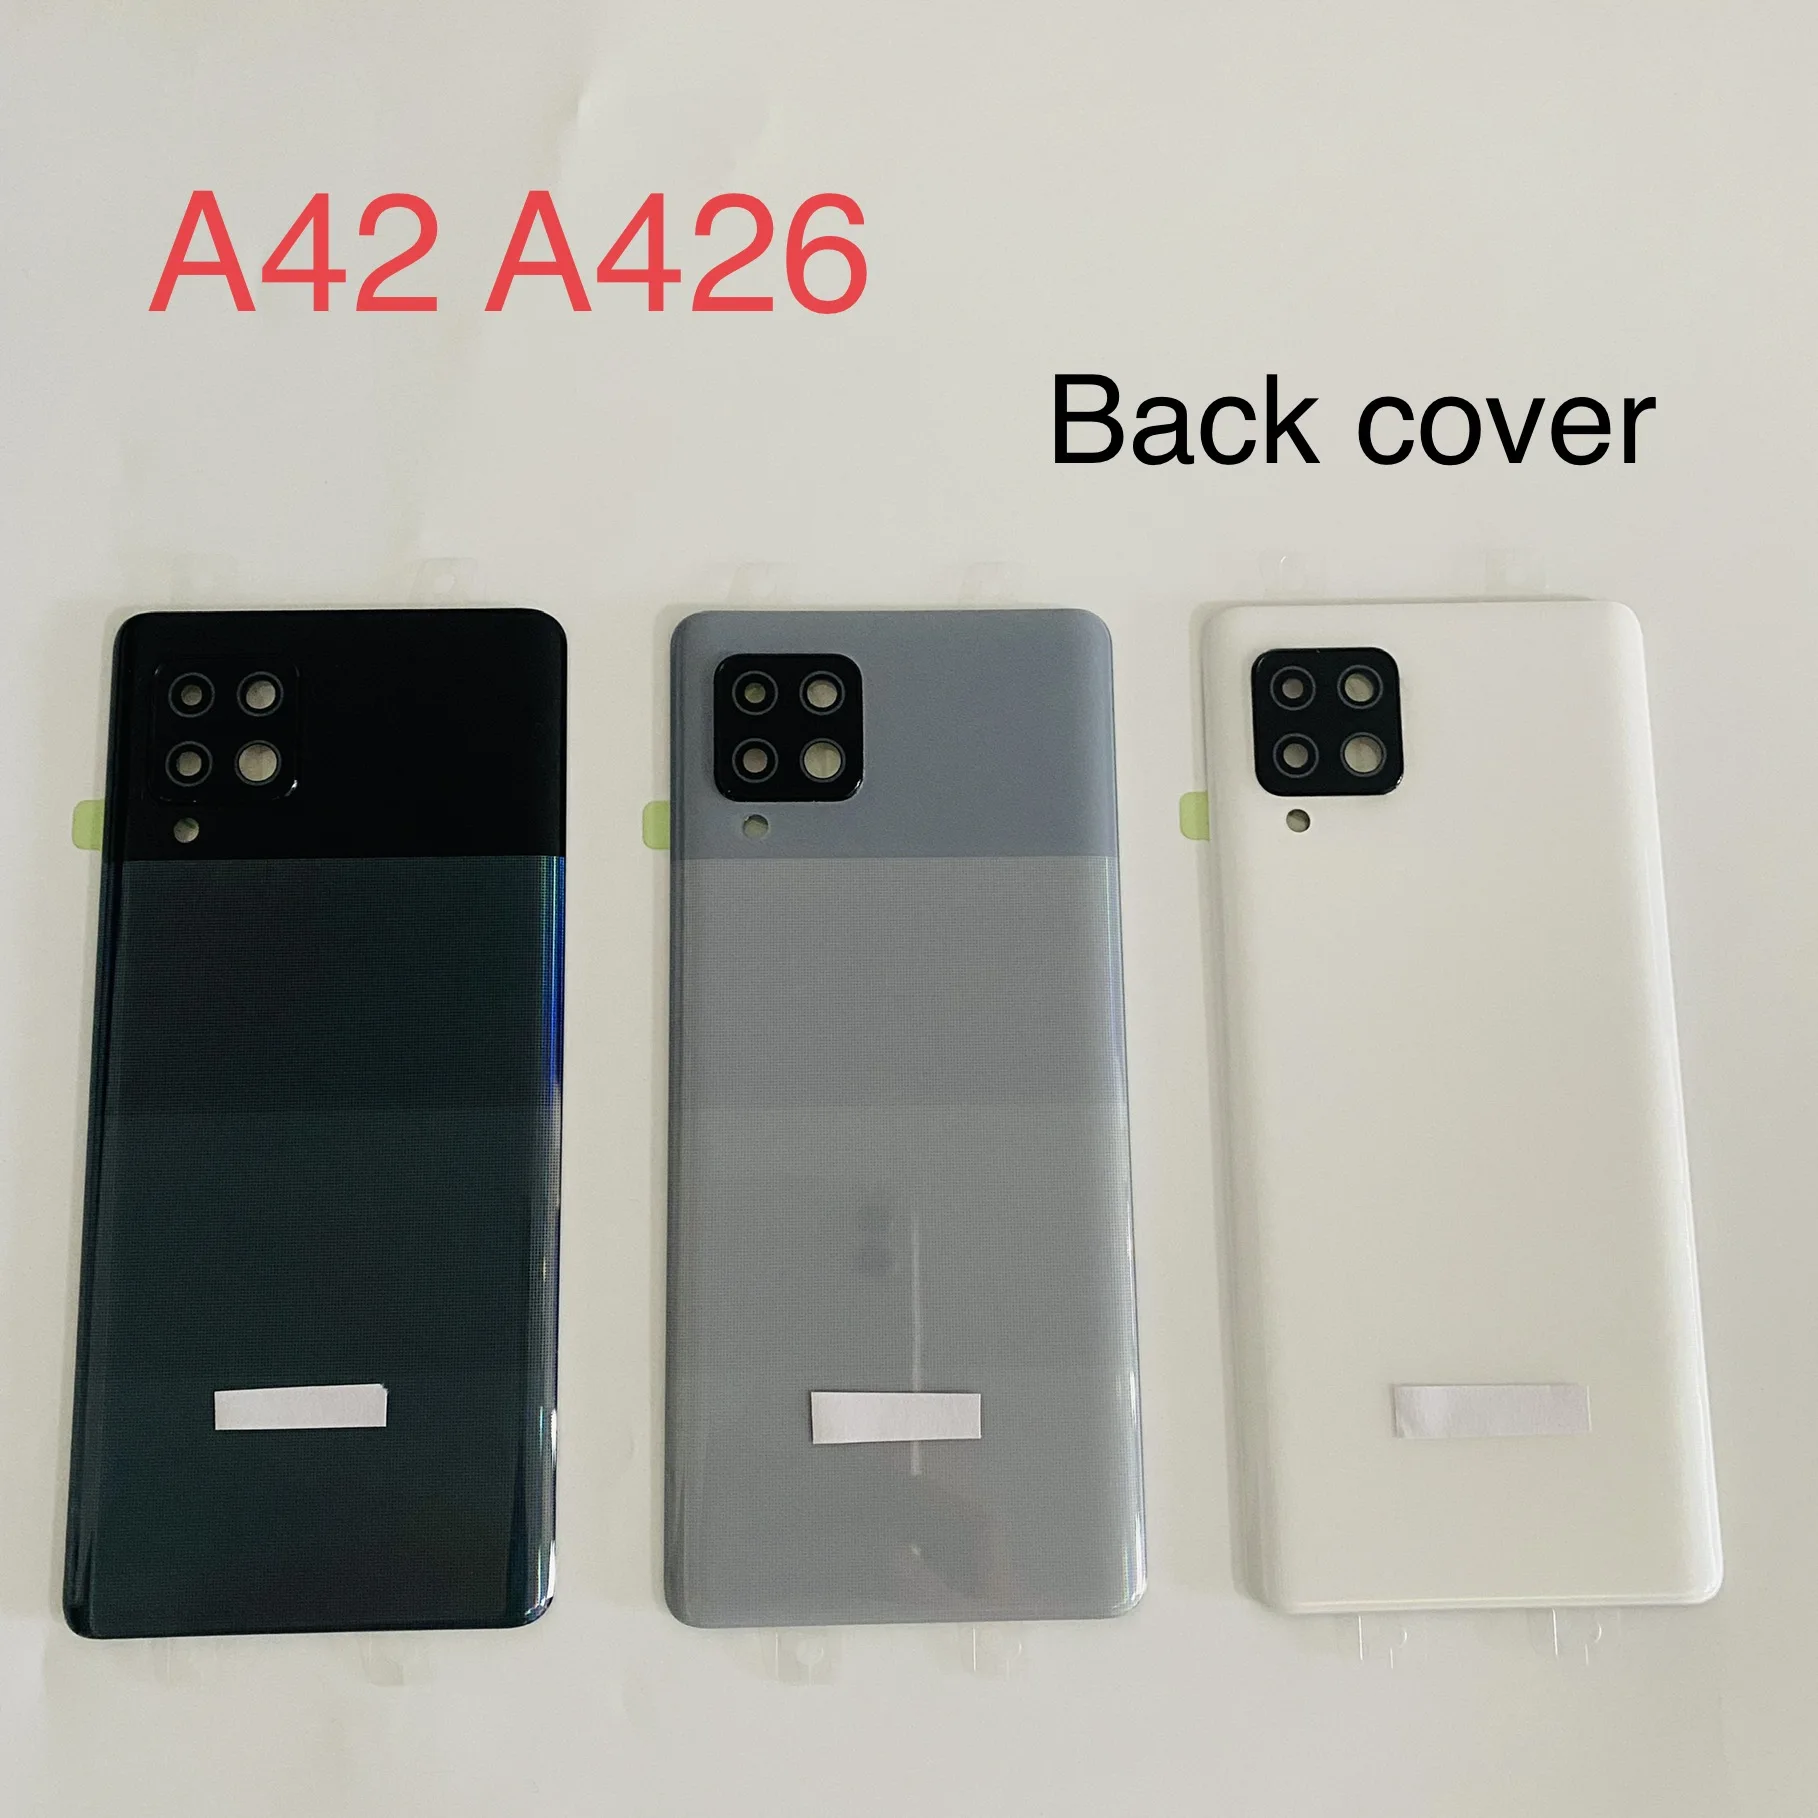 

For SAMSUNG Galaxy A42 5G A426 A426U A426B Back Cover Battery Door Rear Housing Plastic Case Replacement With Camera Lens Lid